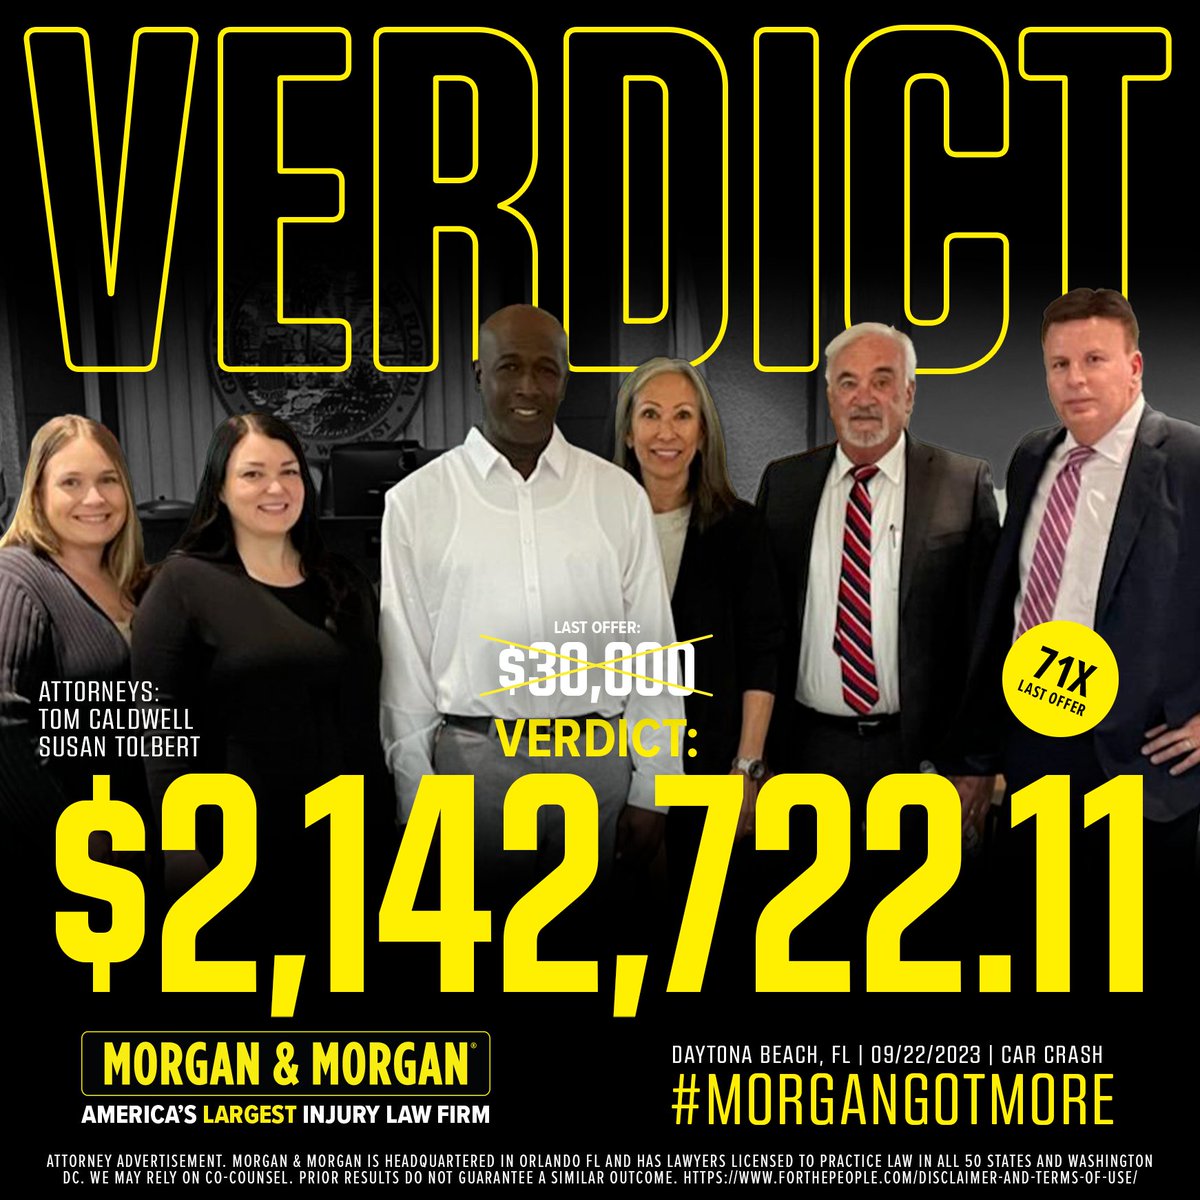 🚨 #VerdictAlert:

Tom Caldwell and Susan Tolbert just received a $2,142,722.11 verdict for our client in Daytona Beach, FL!

That’s 71x the initial offer from big insurance. Proud of this team for fighting #ForThePeople 💪

#MorganMath #MorganGotMore #LAW